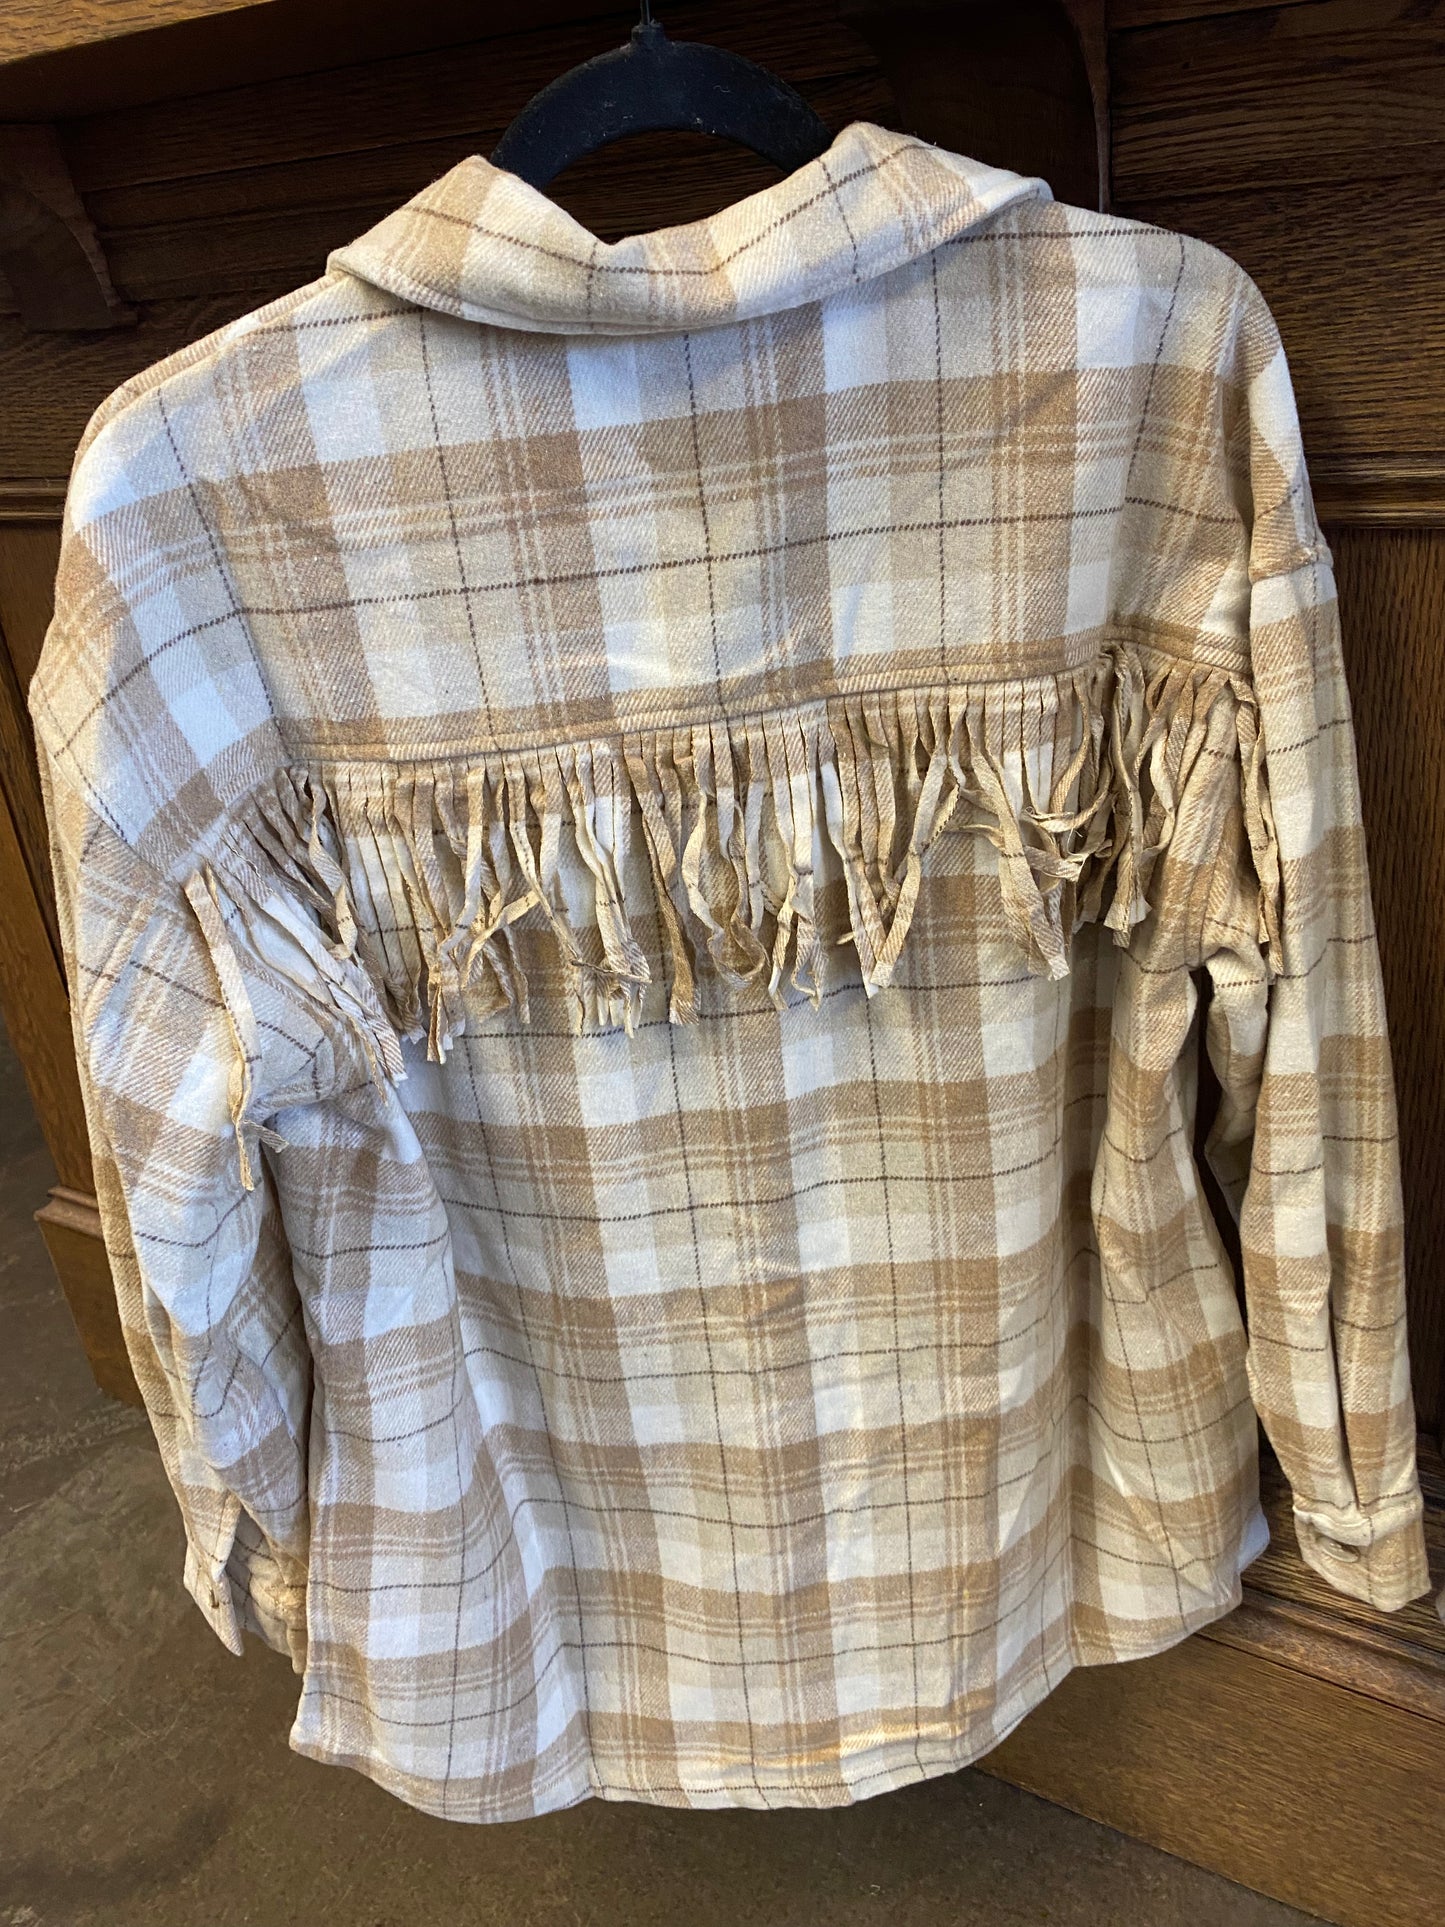 Tan colored Flannel with fringe